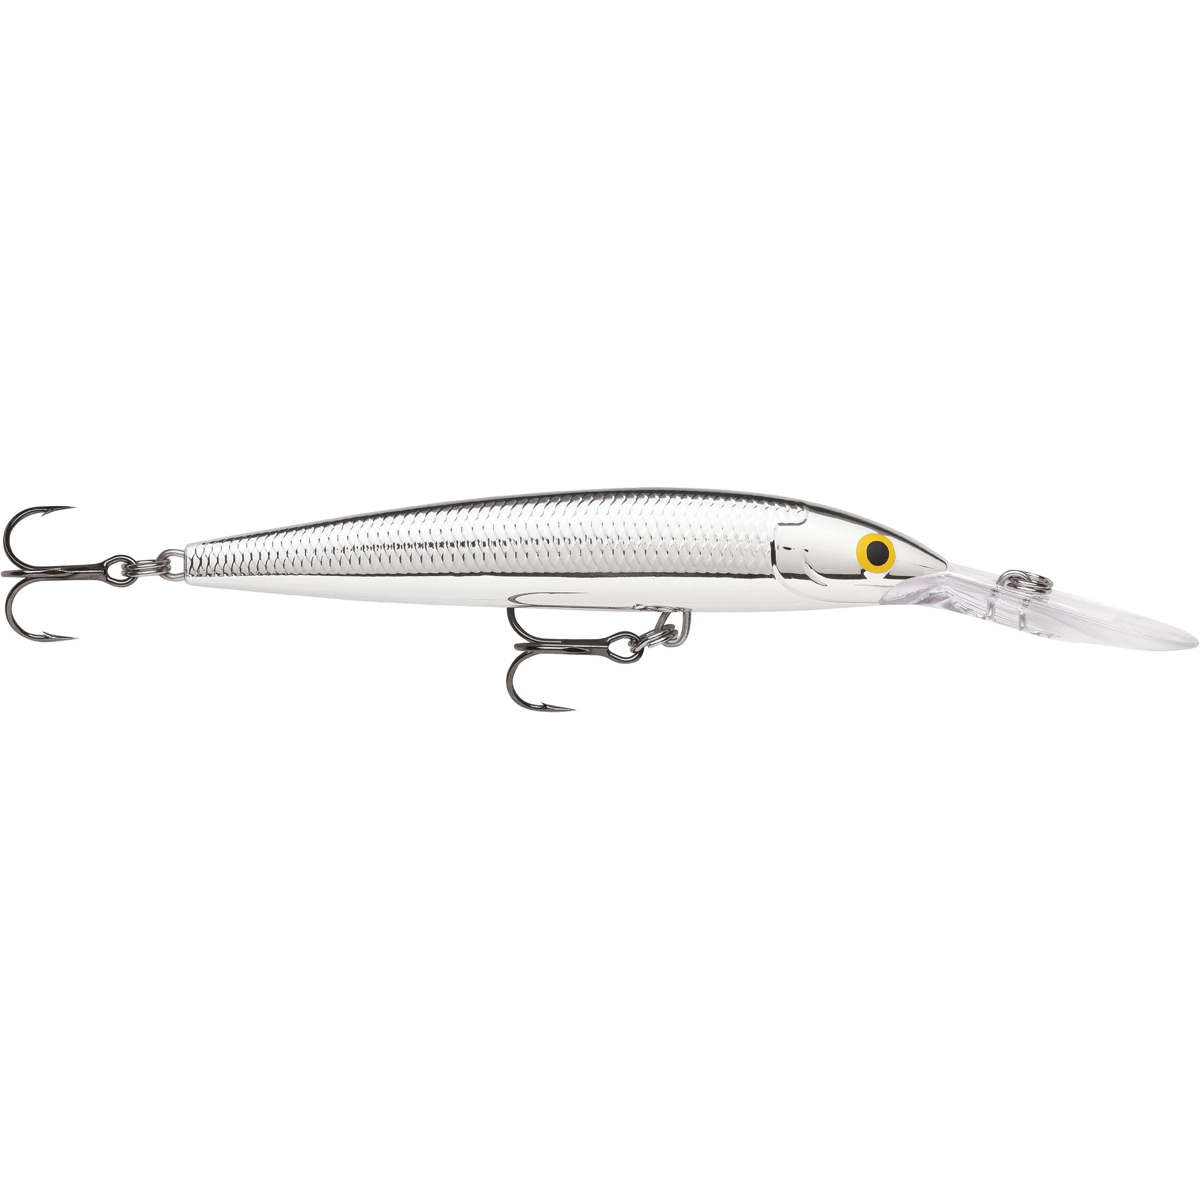 Photo of Rapala Down Deep Husky Jerk for sale at United Tackle Shops.